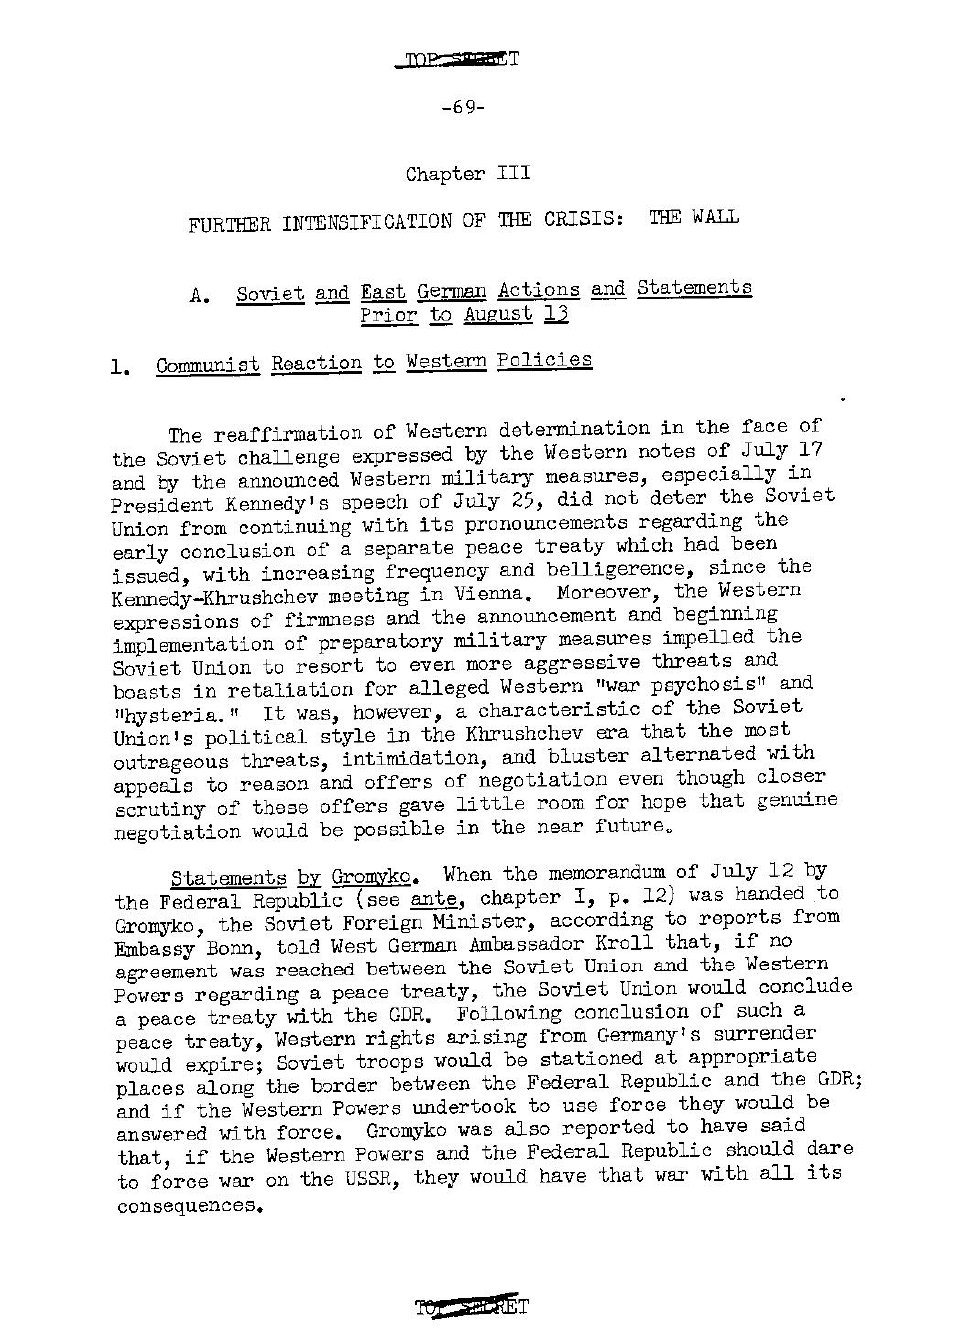 Berlin-Crisis-State-Department-Historical-Documents-Page-3